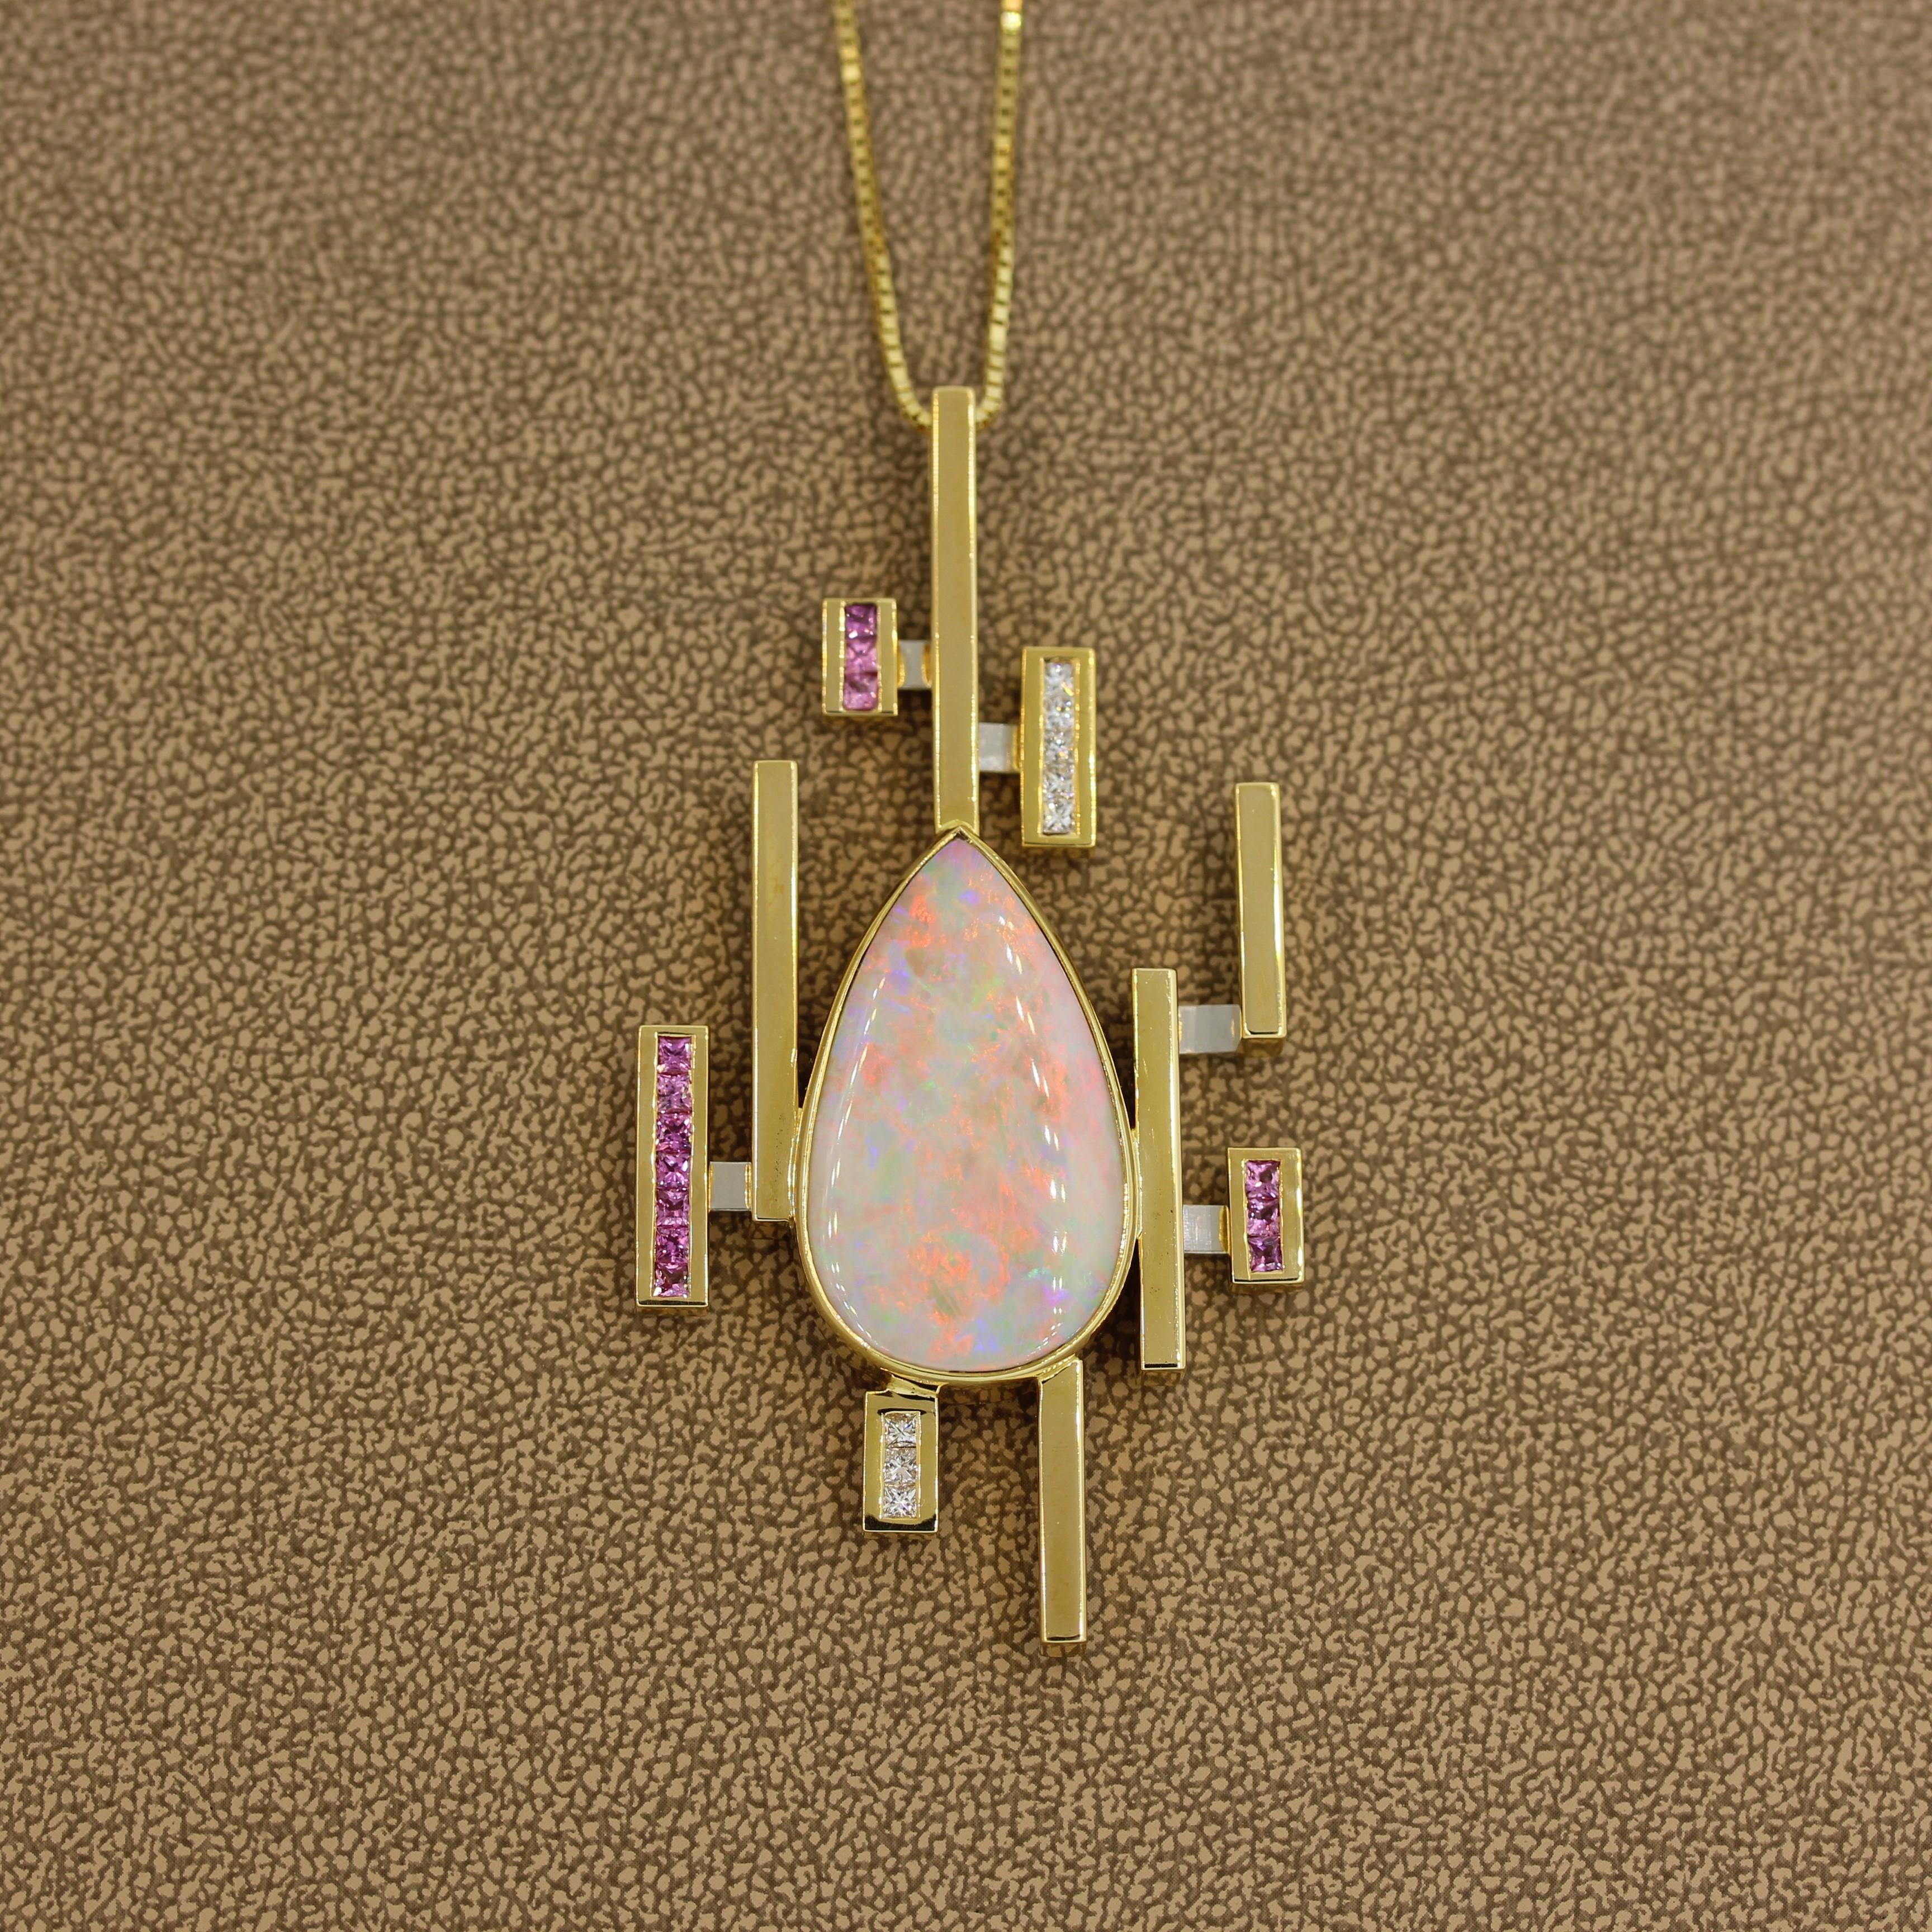 This futuristic pendant features a 30 carat Australian opal bezel set in the center of this pendant. The luscious Australian opal is accented by 0.51 carats of princess cut pink sapphires and 0.34 carats of diamonds channel set in vertically linear